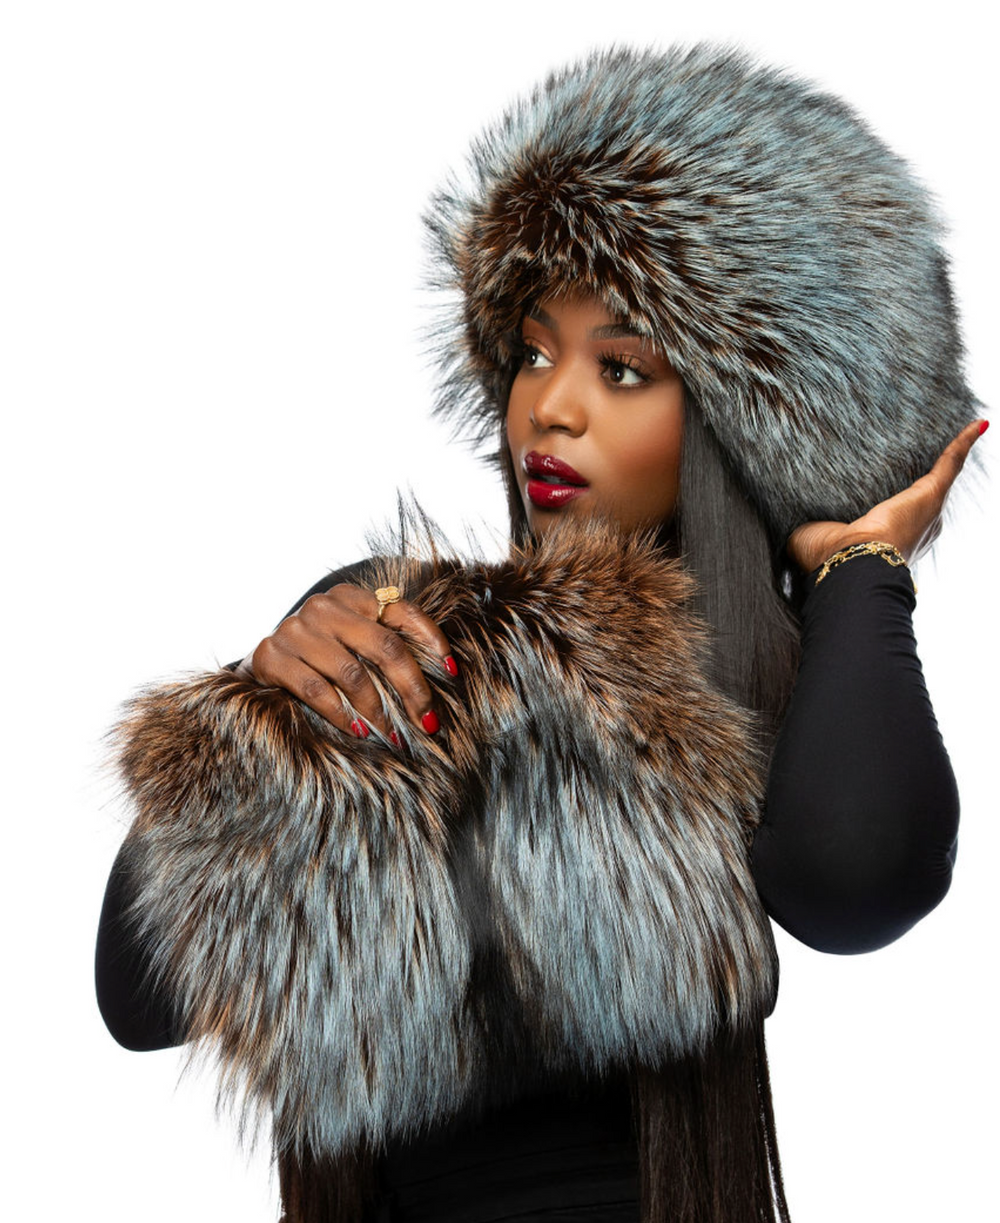 Dina Oversized Silver Fox Hat: Color Icy Blue